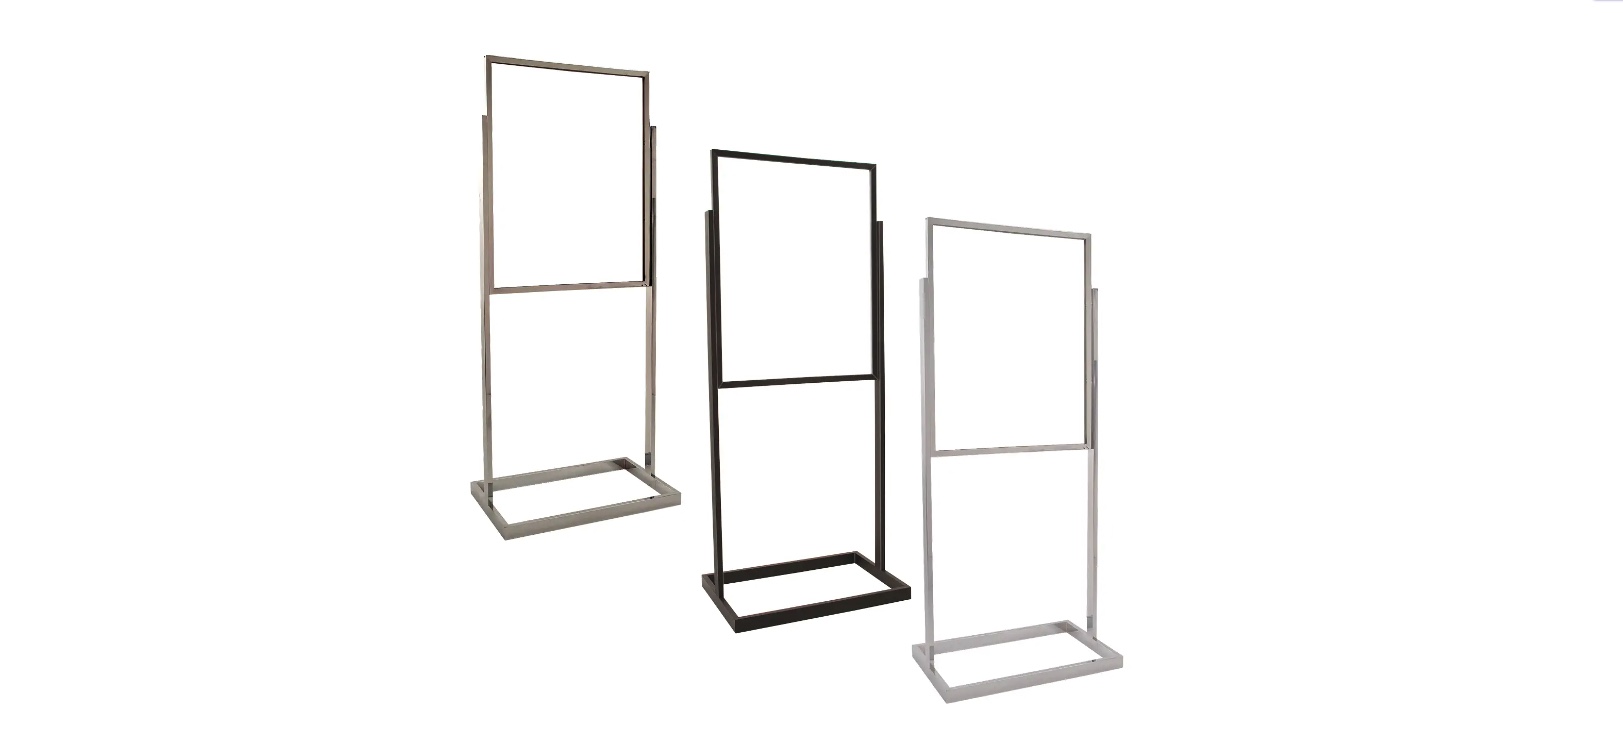 Retail Banner and Bulletin Sign Holders